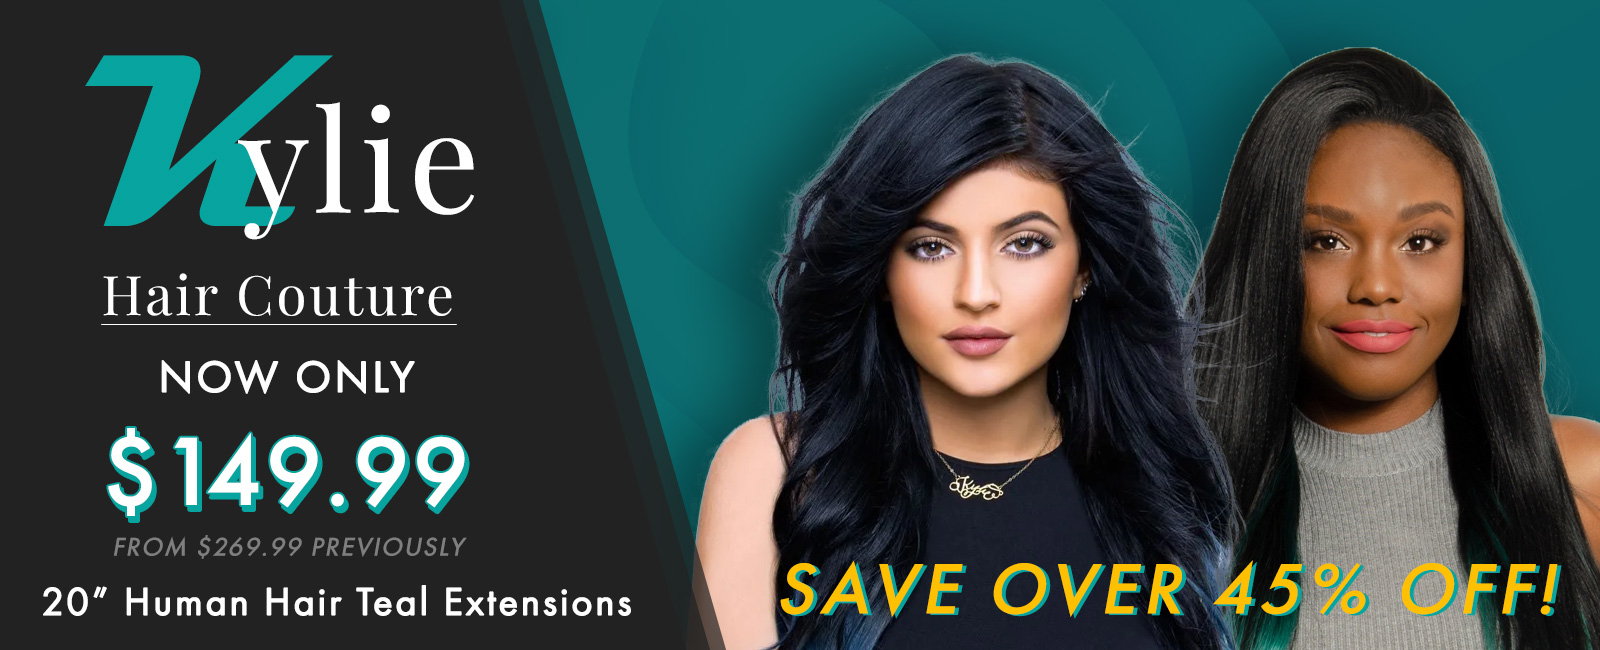 uw-kylie-ext-promo-mobile-homepage-banner